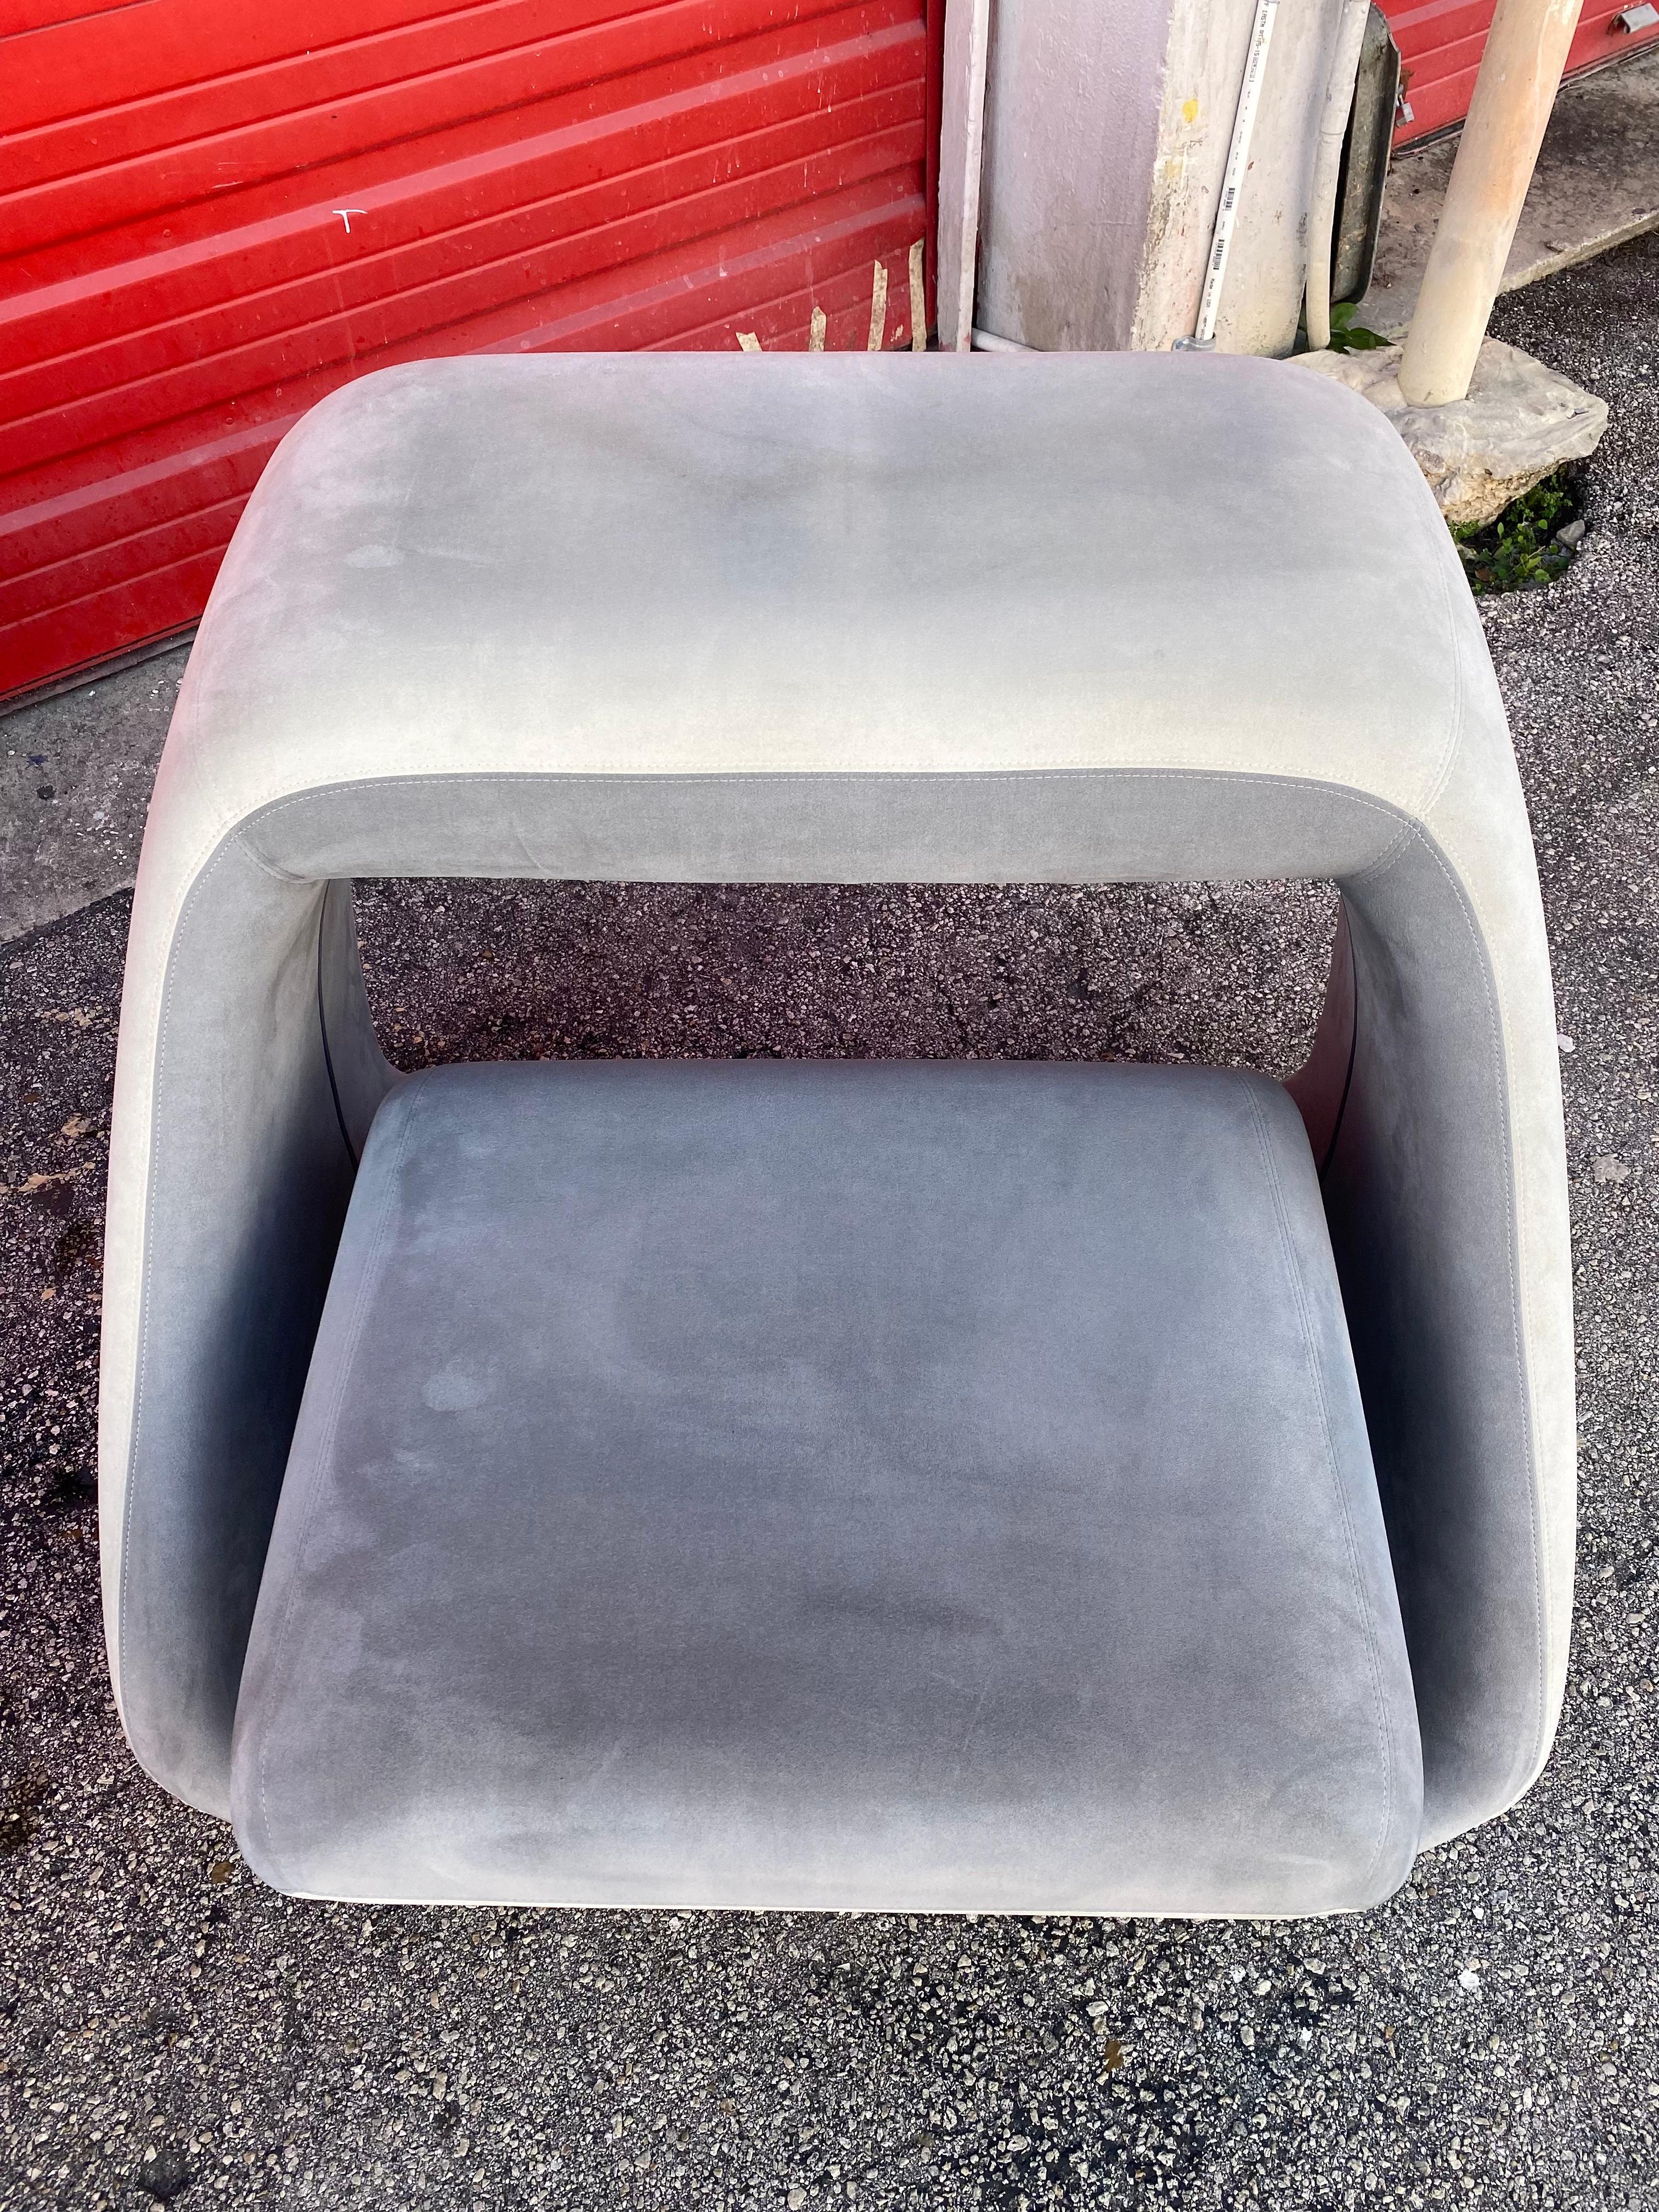 1970s Meritalia Sculptural Space Age Air Loungers Chairs, Set of 2 For Sale 3